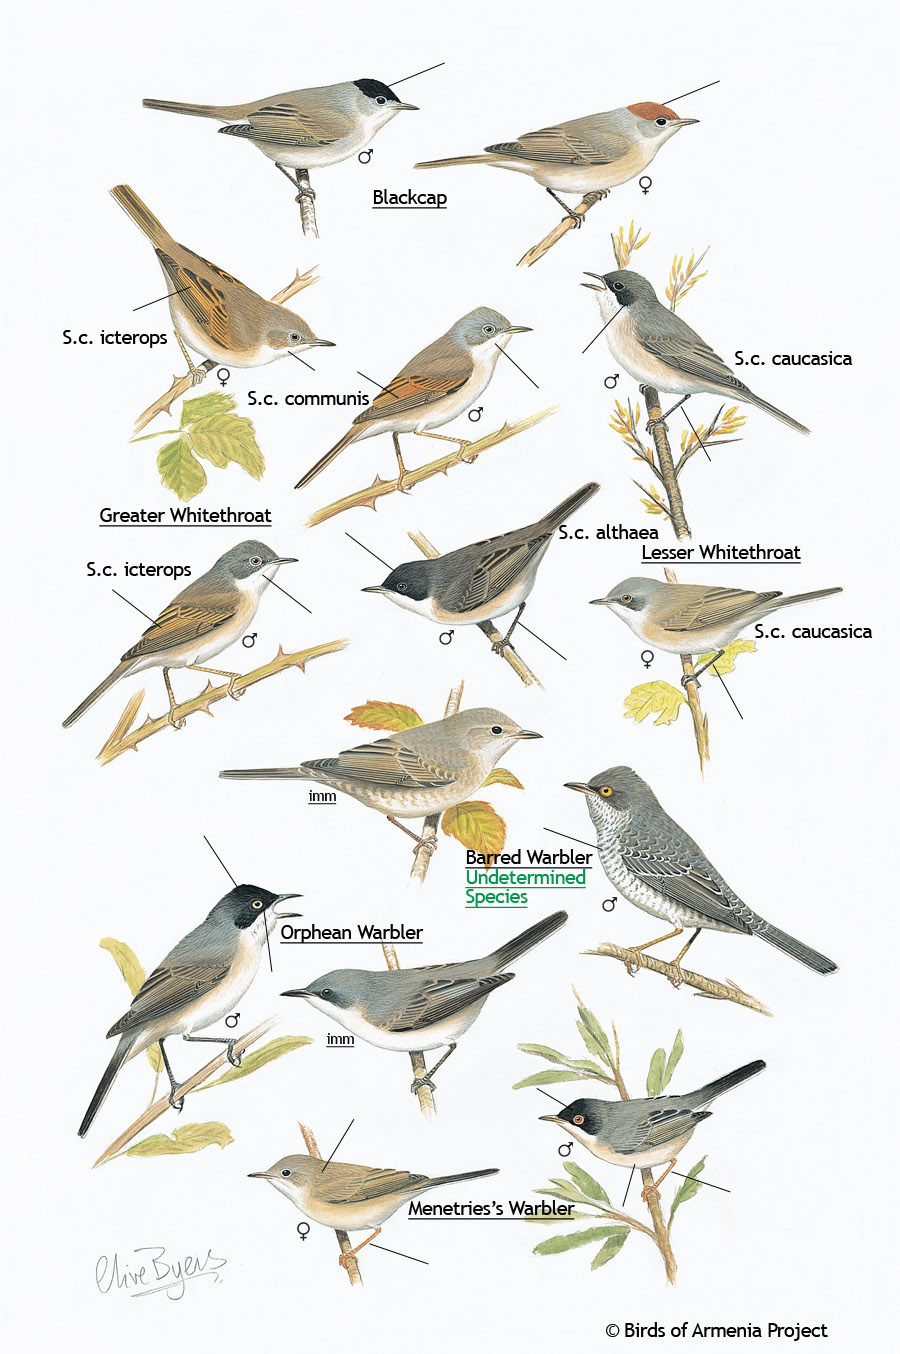 Blackcaps, Whitethroats and Warblers